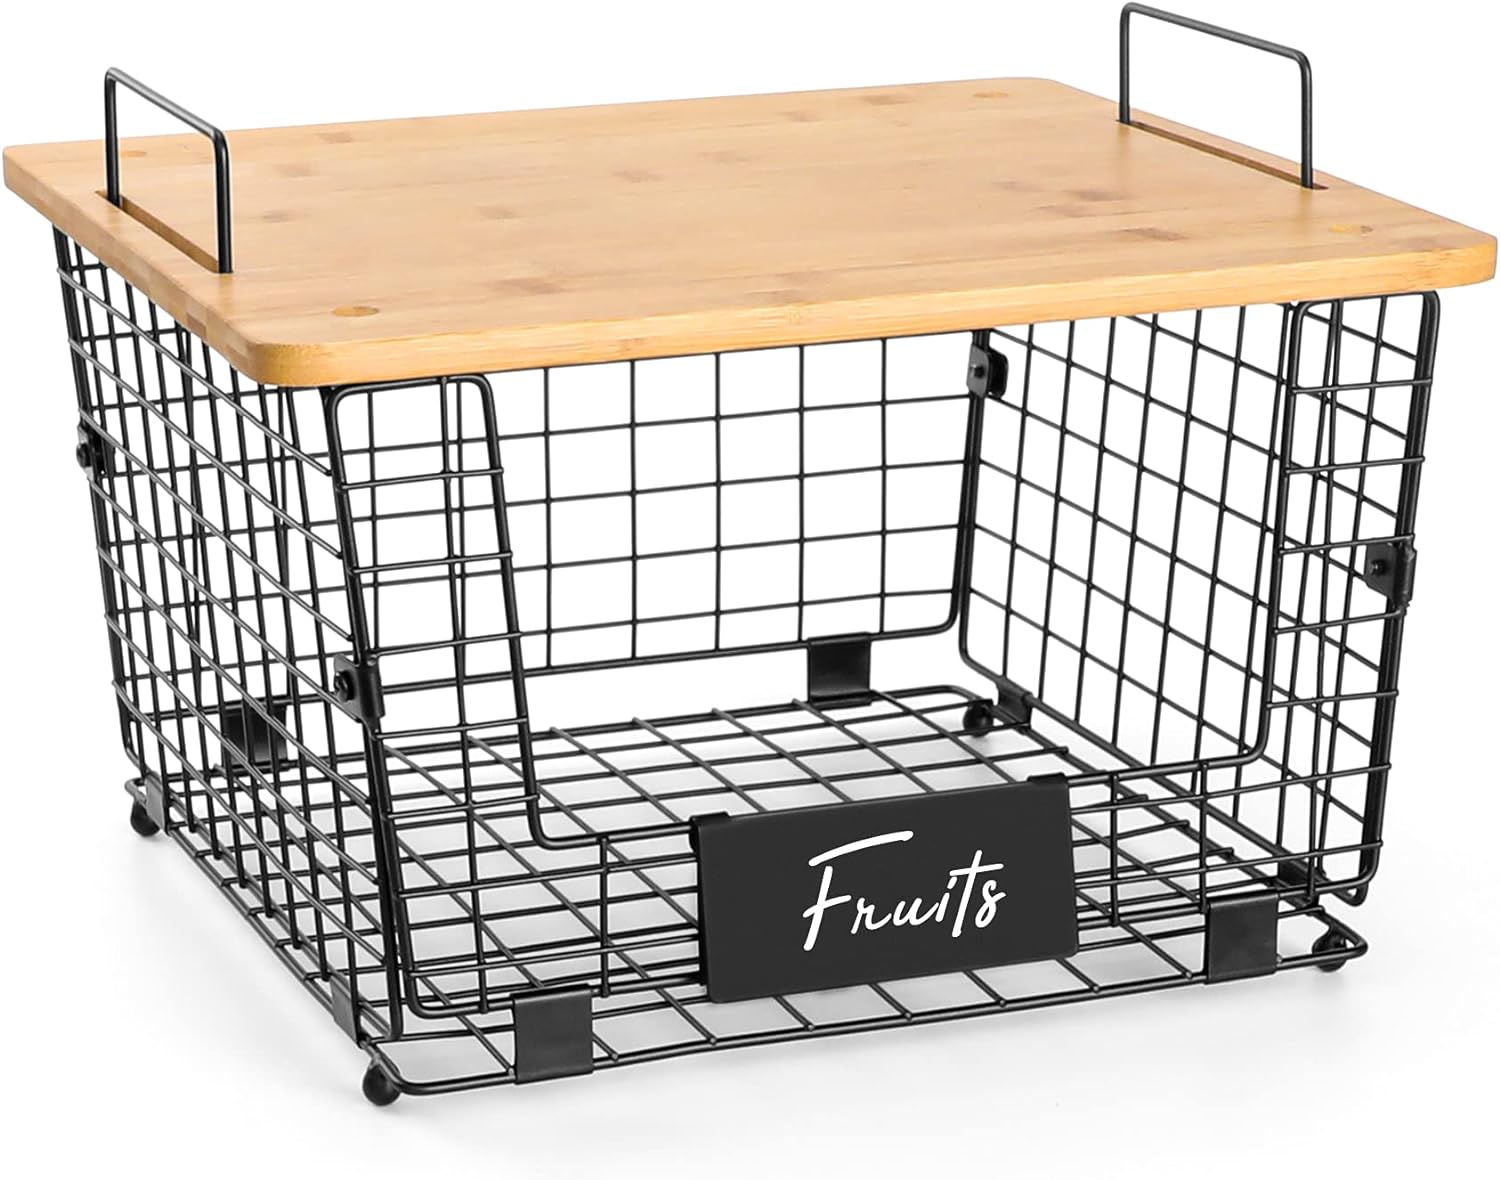 2 Set Stackable Wire Basket with Bamboo Top -Kitchen Counter, Pantry Organization and Storage - Cabinet, Shelf, Countertop Space Saving Organizing - Produce, Fruit, Onion, Potato, Bread Organizer Bin